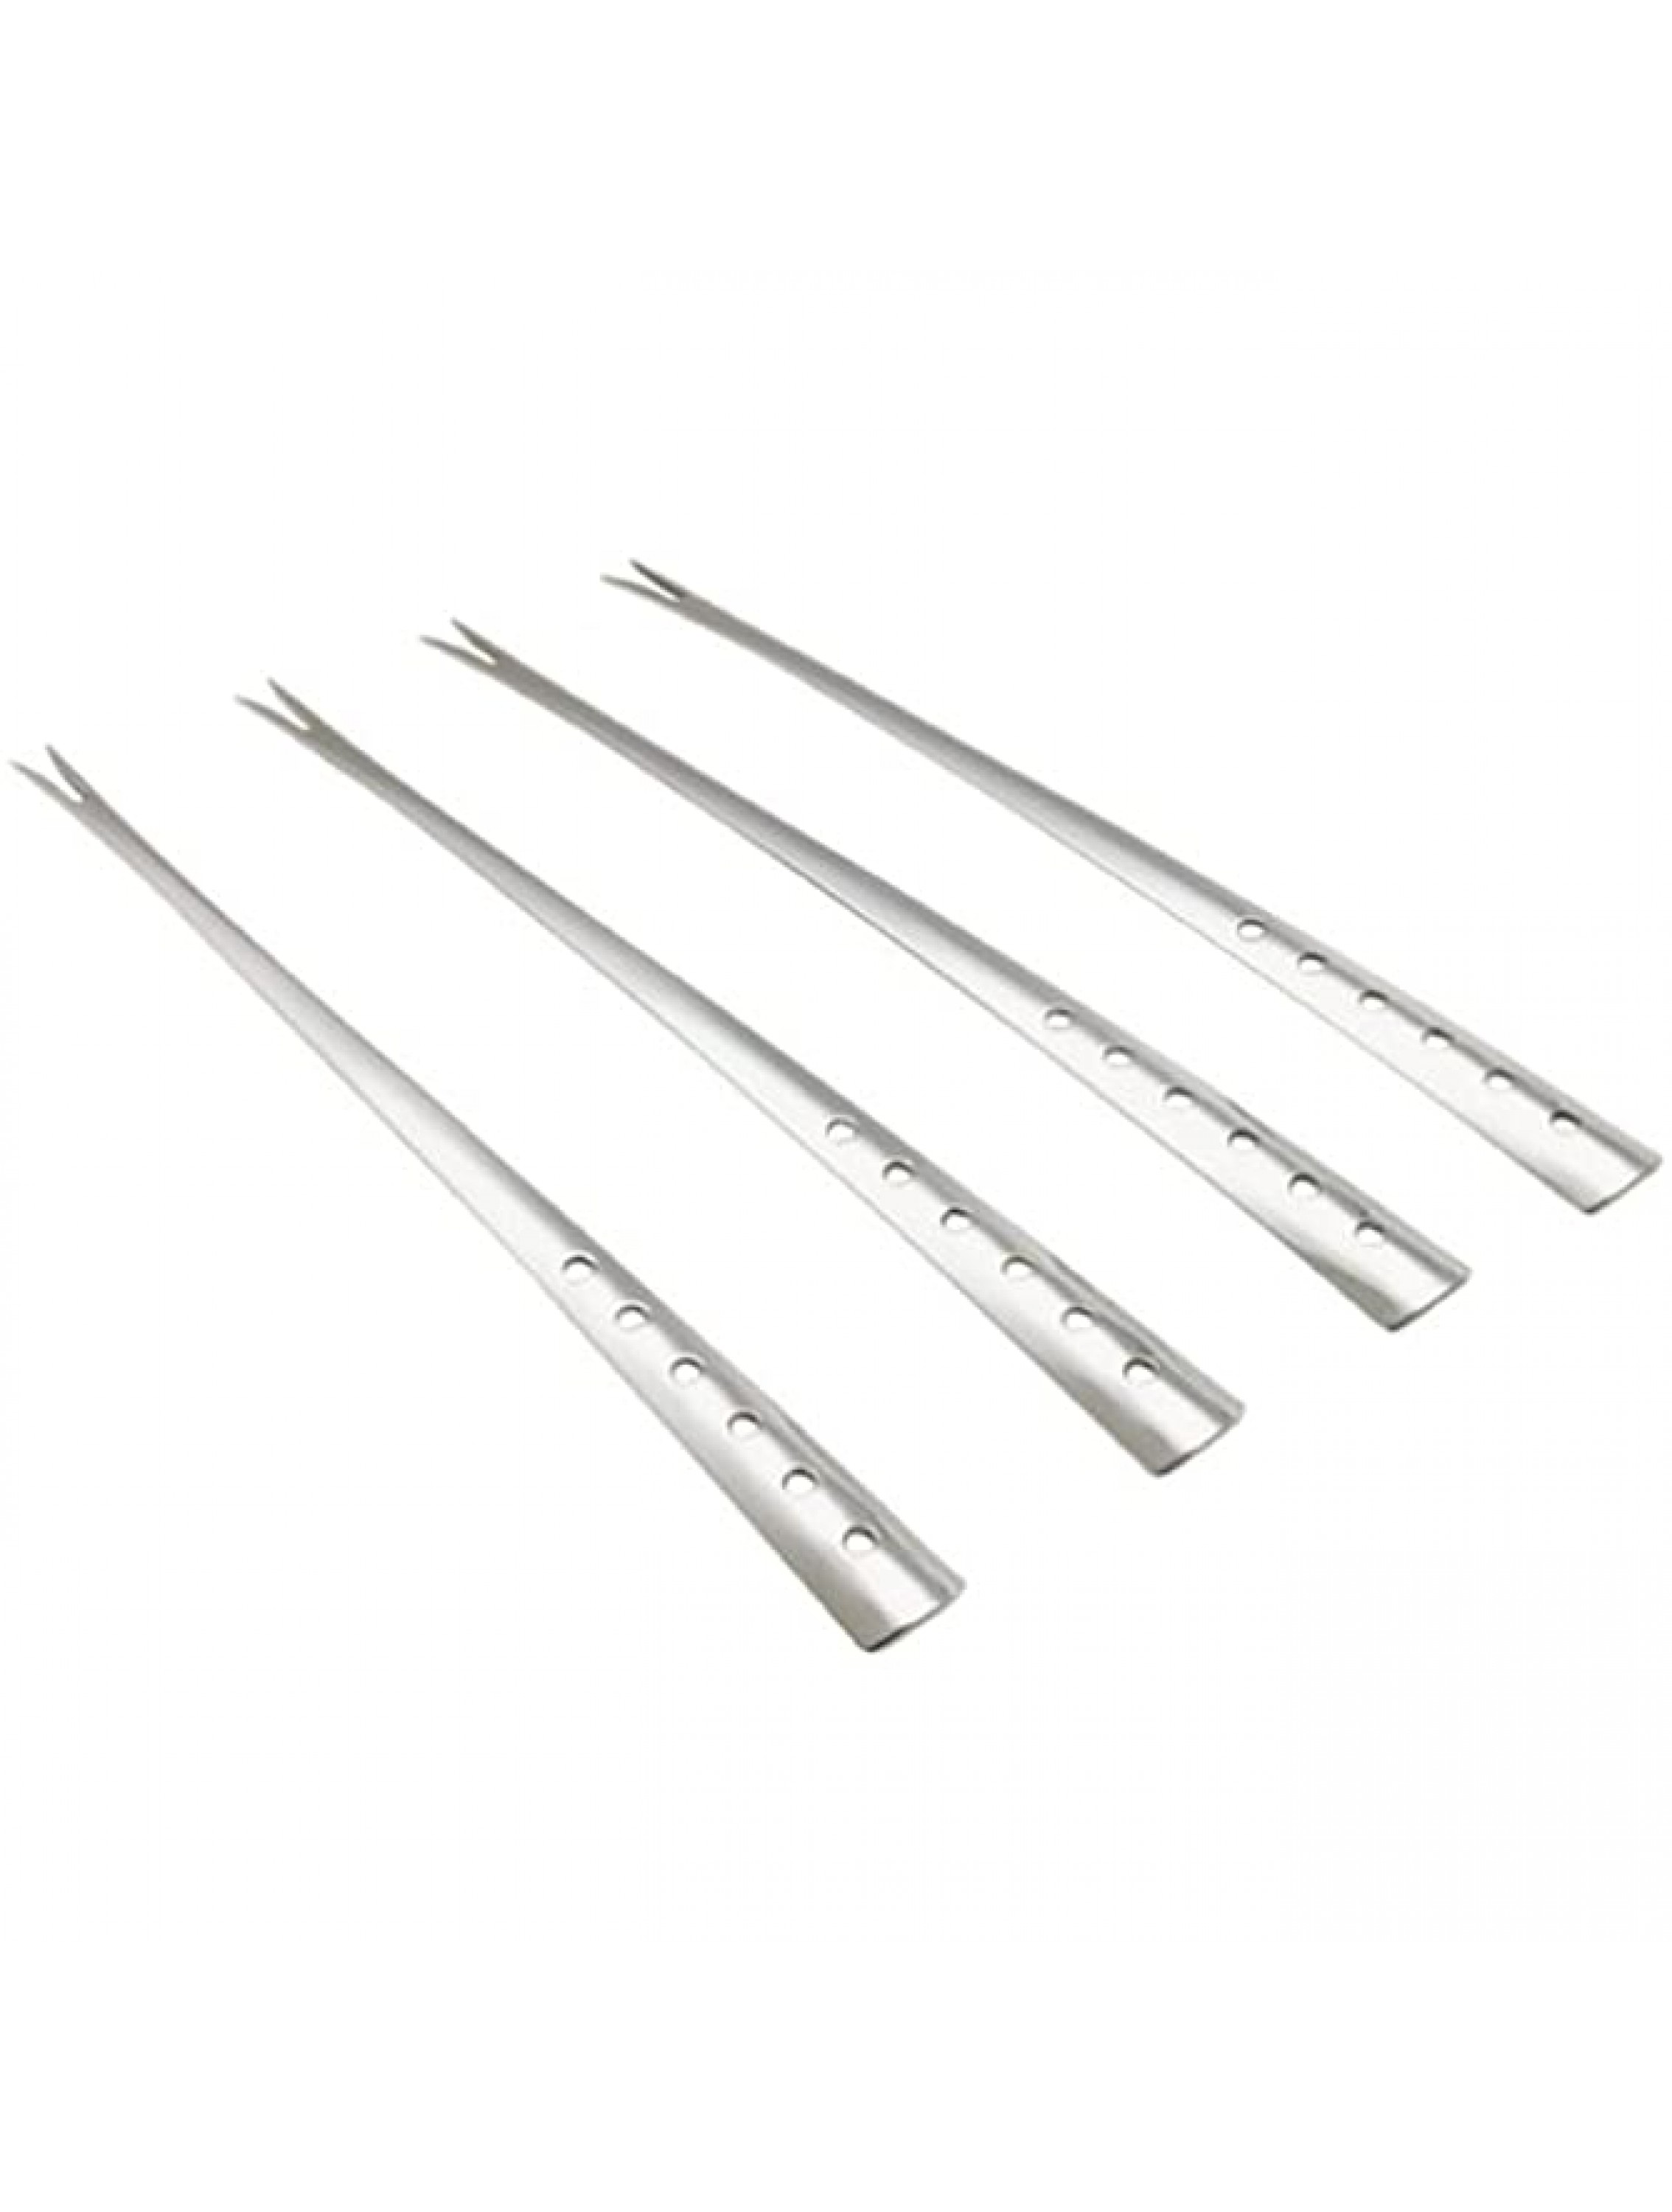 9-inch Stainless Steel Fondue Forks Set of 4 - BQC1A9EJA